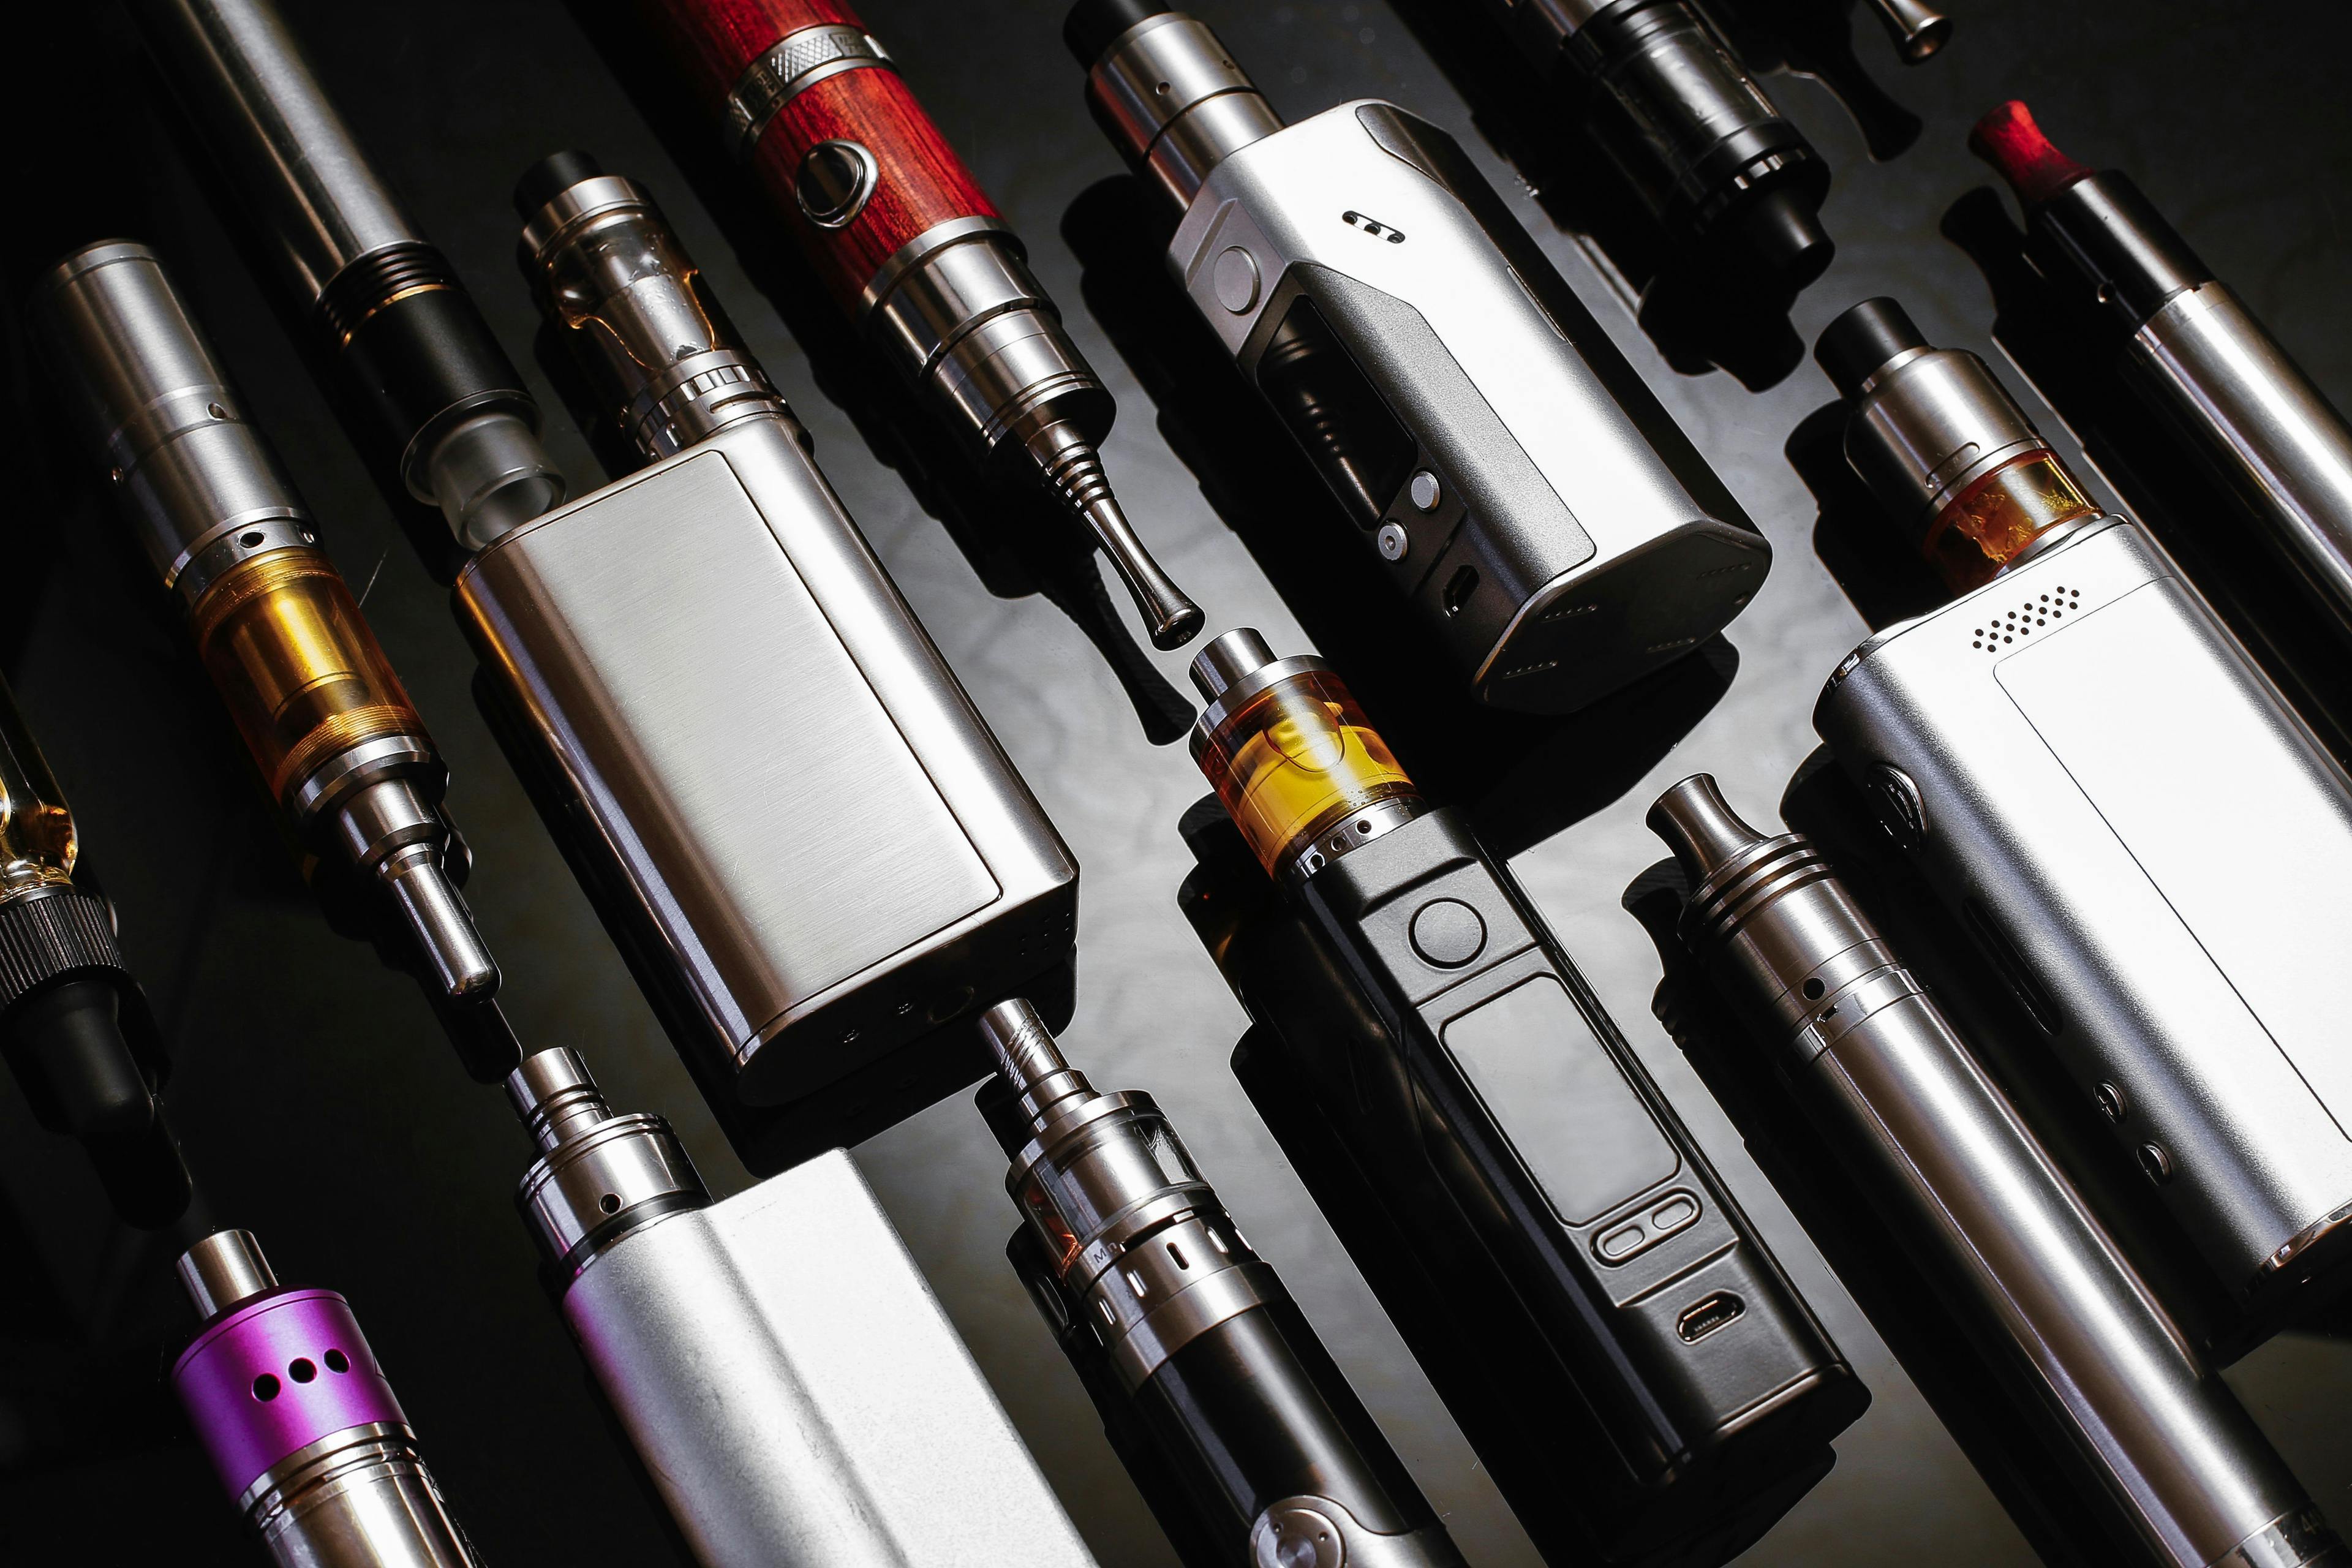 E-Cigarette Use Among Patients with CVD Rebounds After Initial Decline